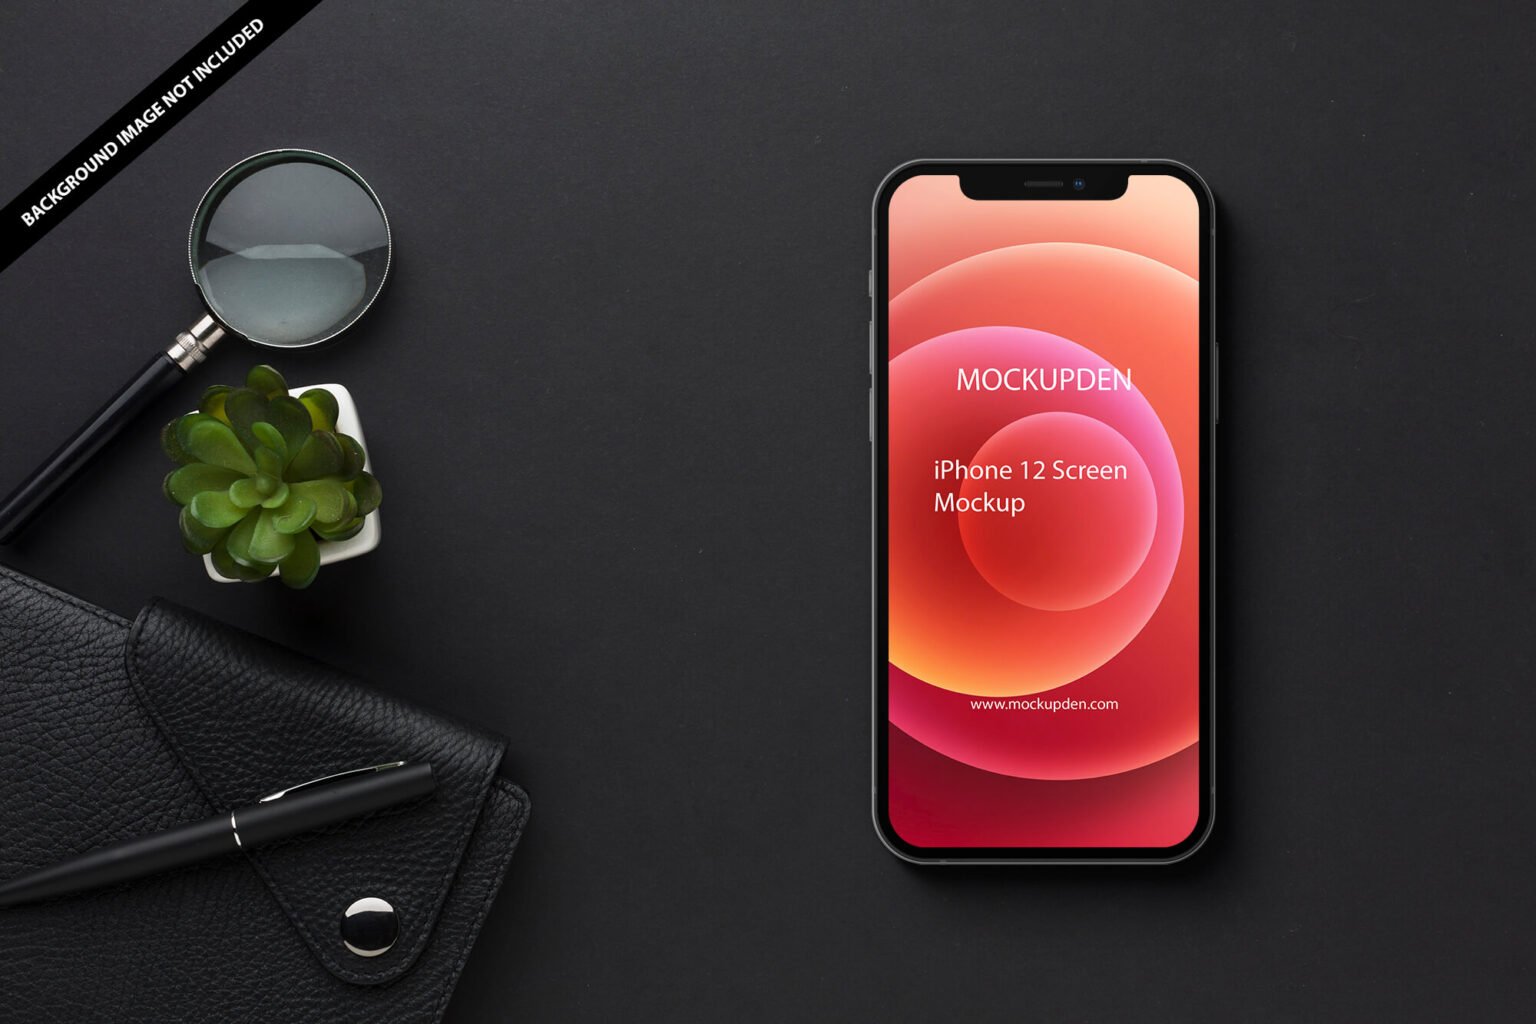 Download Free iPhone12 Screen Mockup PSD Template - Mockupden